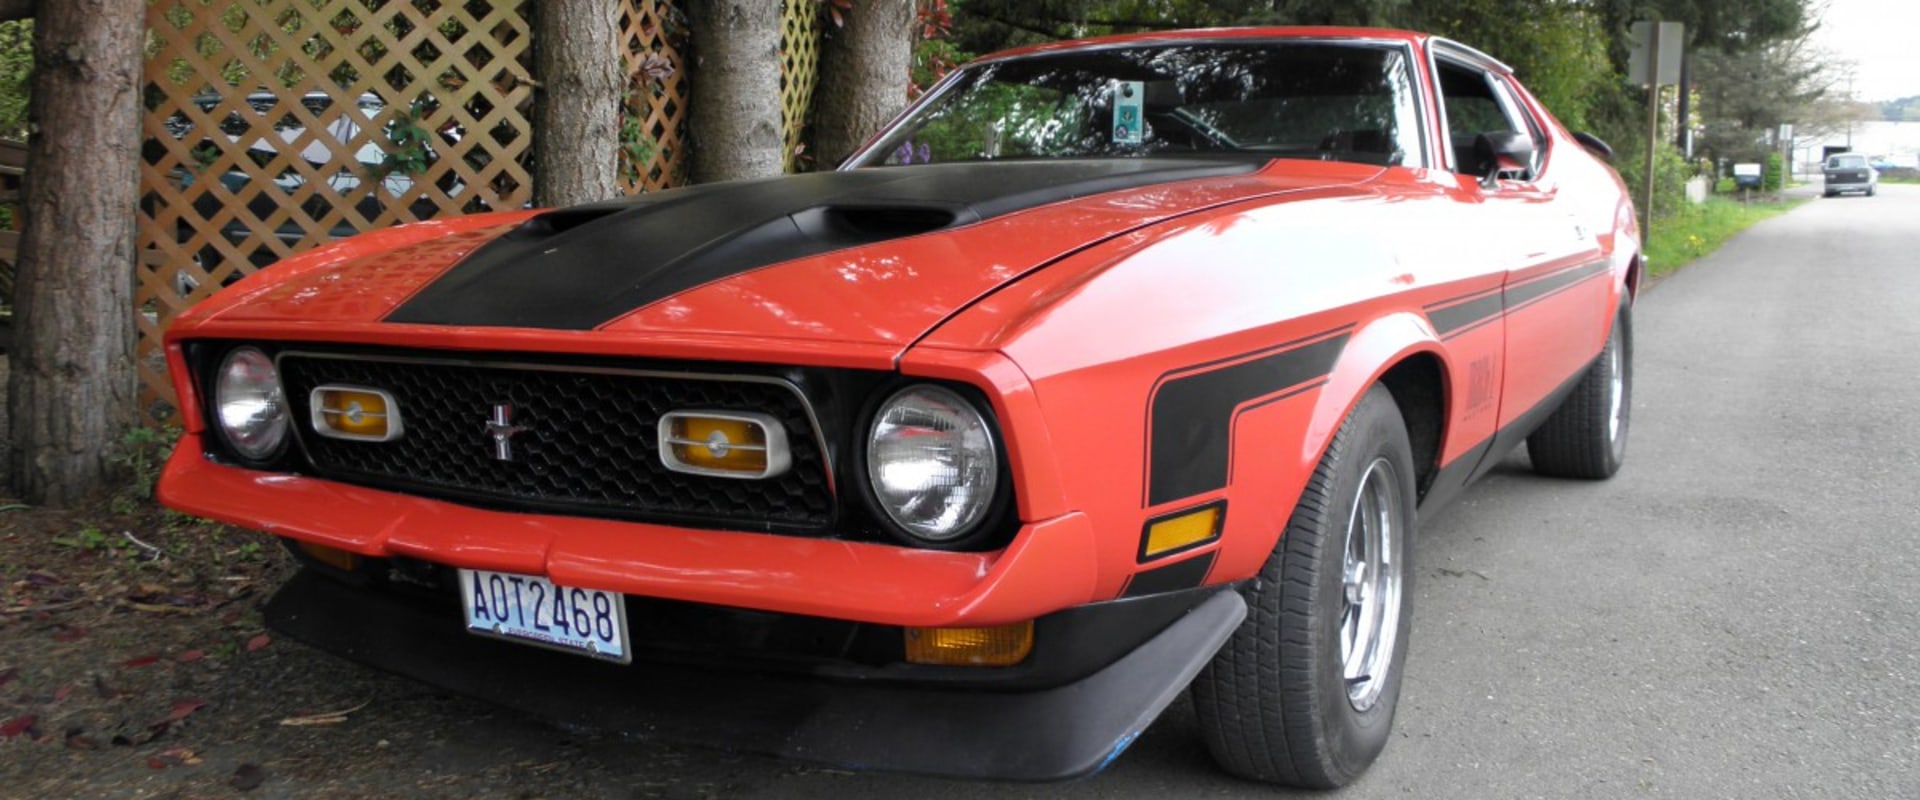 Exploring Before-and-After Restoration Pictures of the 1972 Mustang Sprint Car